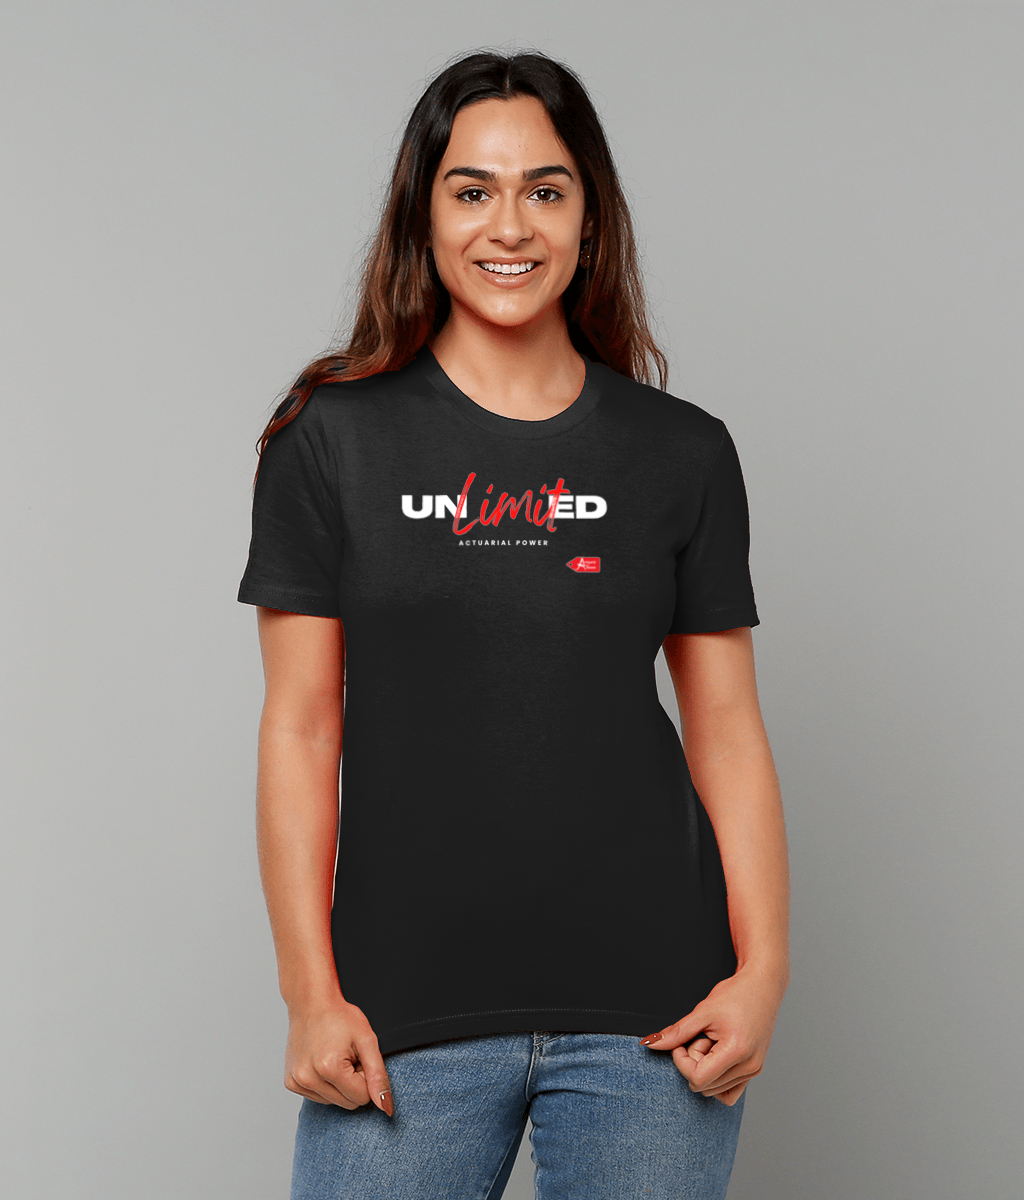 Unlimited Actuarial Power T Shirt